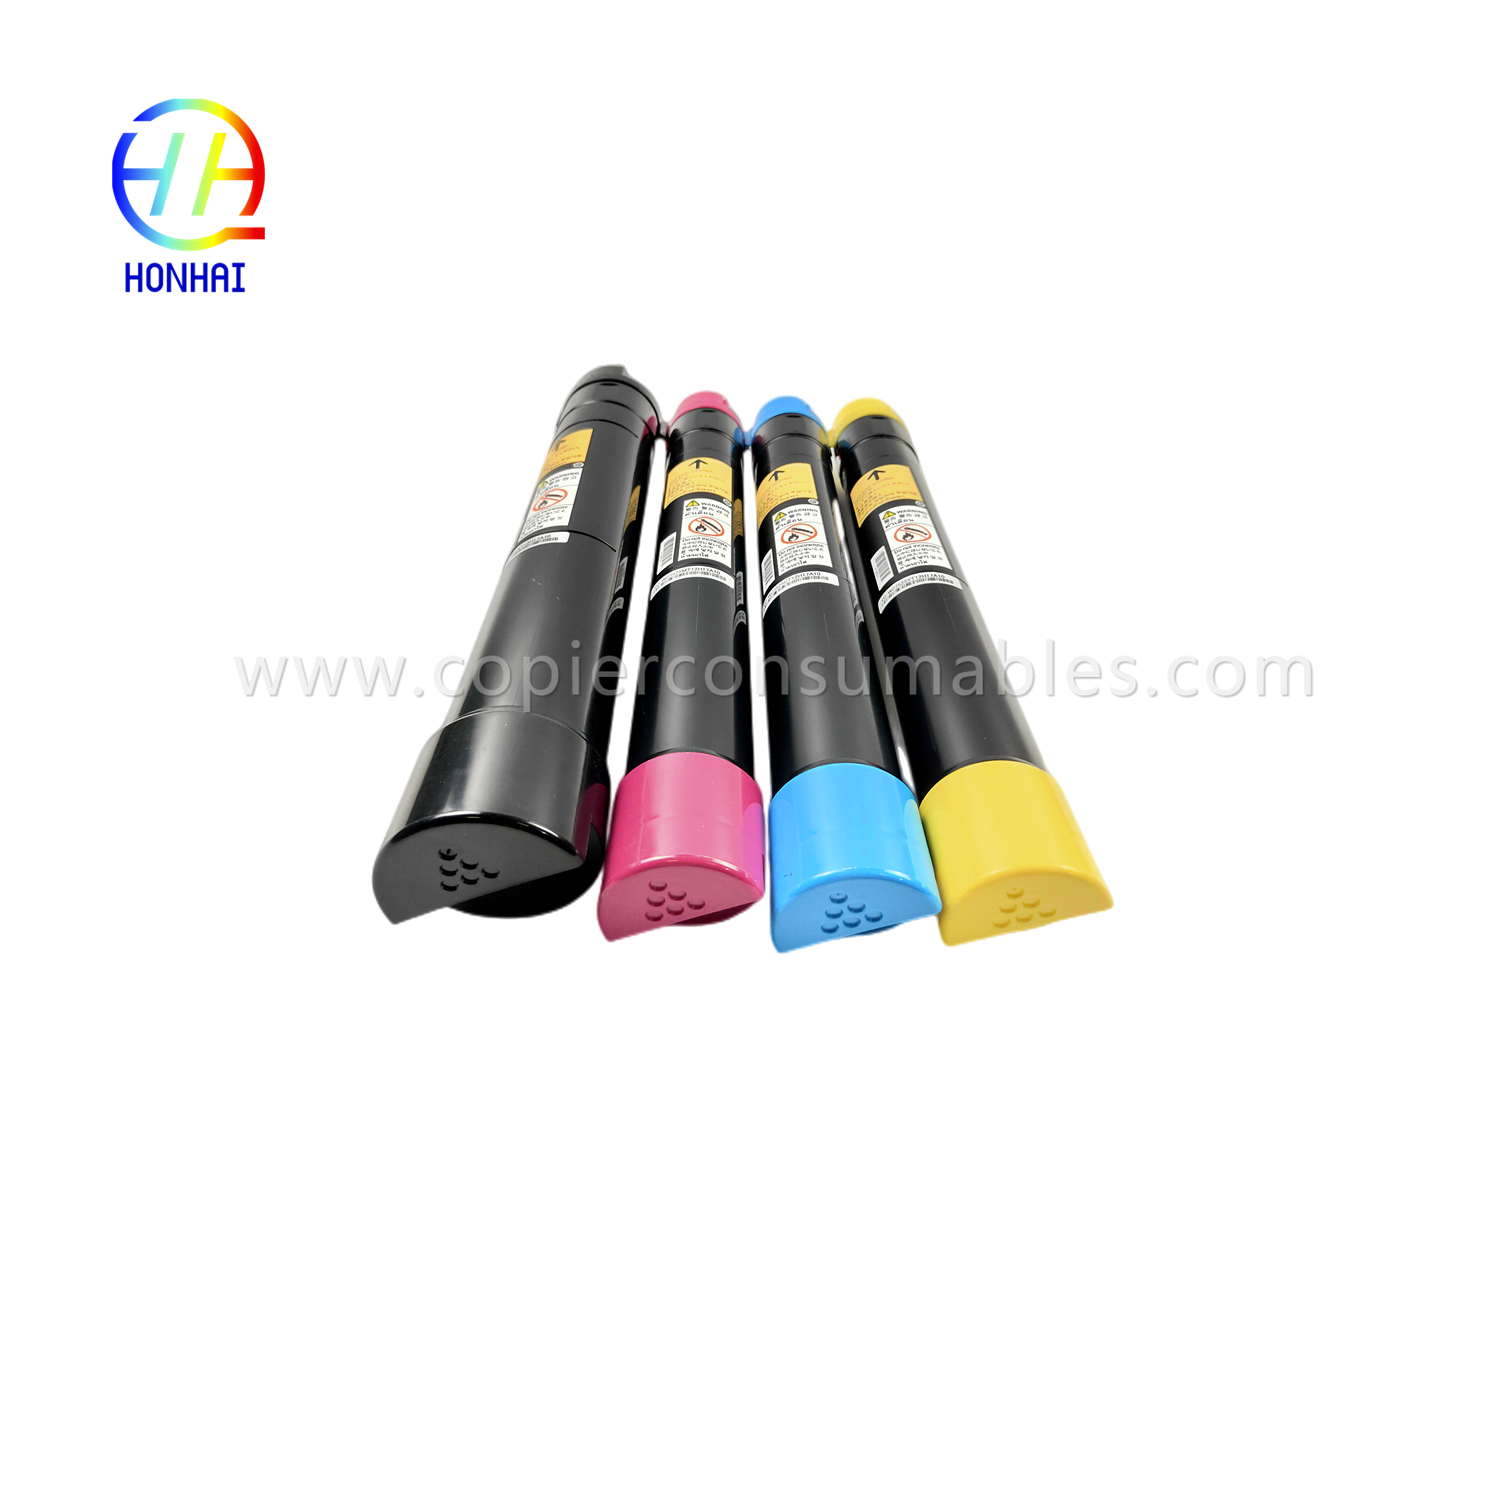 https://www.copierconsumables.com/toner-cartridge-imported-powder-set-bcmy-for-xerox-workcentre-7830-7835-7845-7855-7970-7525-7530-7535-7545-7556-006r01513- 006r01514-006r01515-006r01516-उत्पाद/